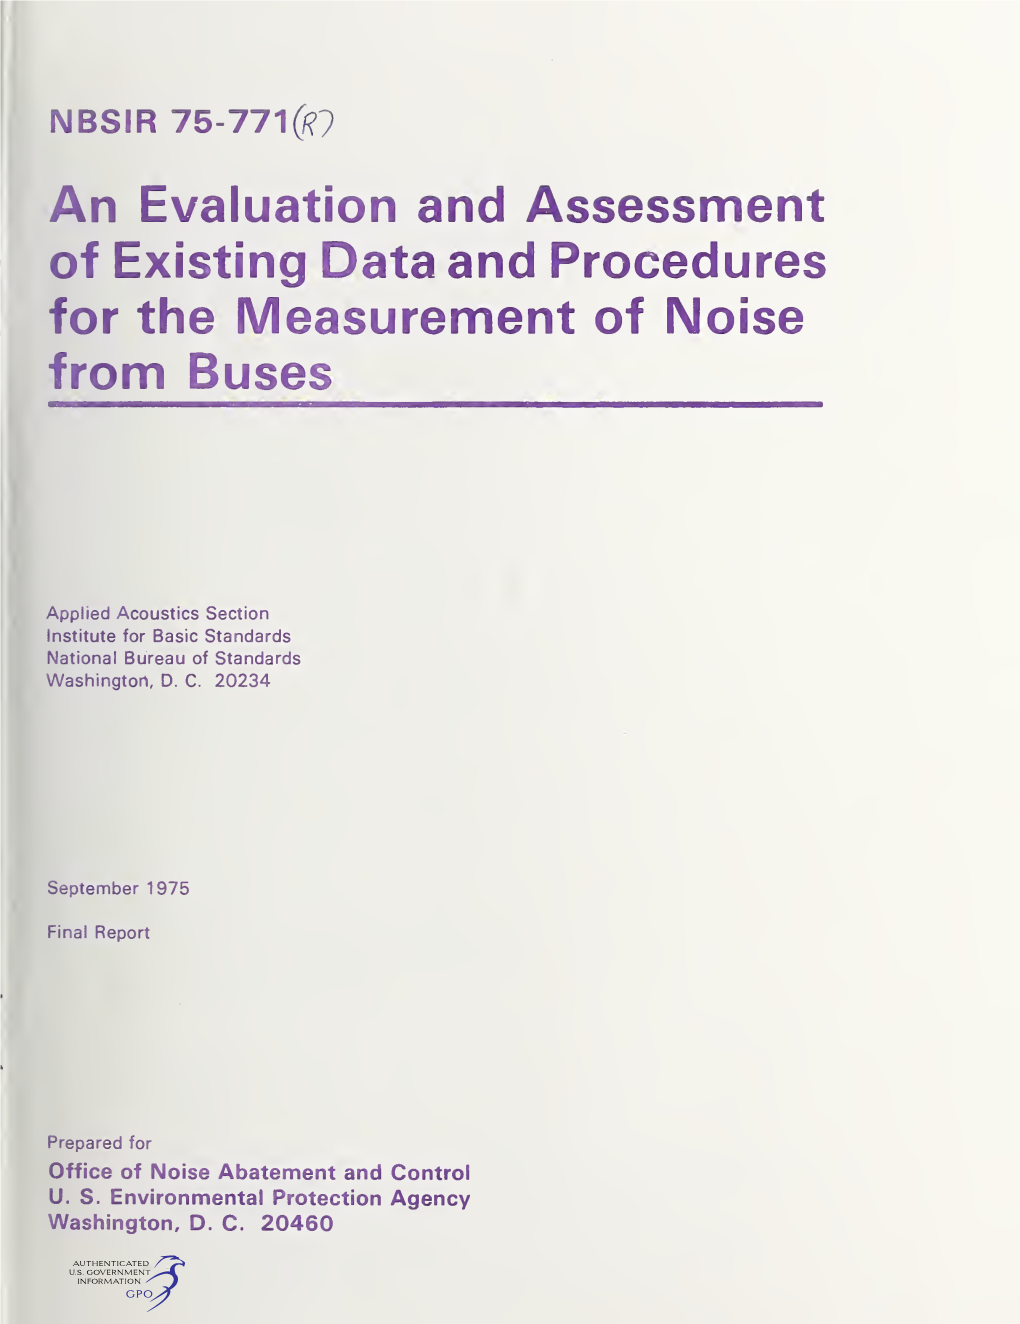 An Evaluation and Assessment of Existing Data and Procedures for the Measurement of Noise from Buses